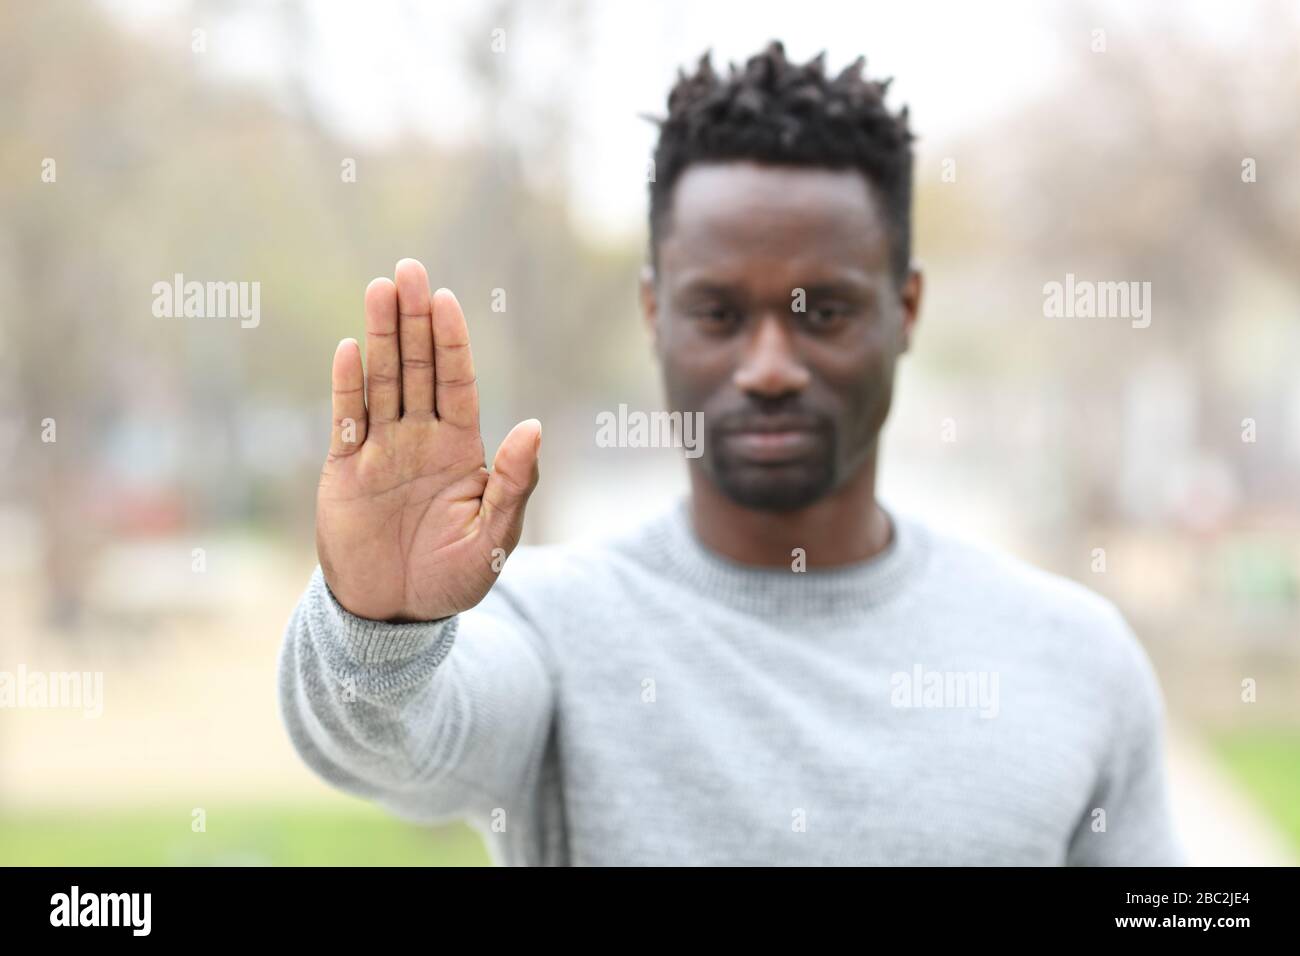 Front view portrait of an angry black man gesturing stop showing hand palm outdoors in a park Stock Photo